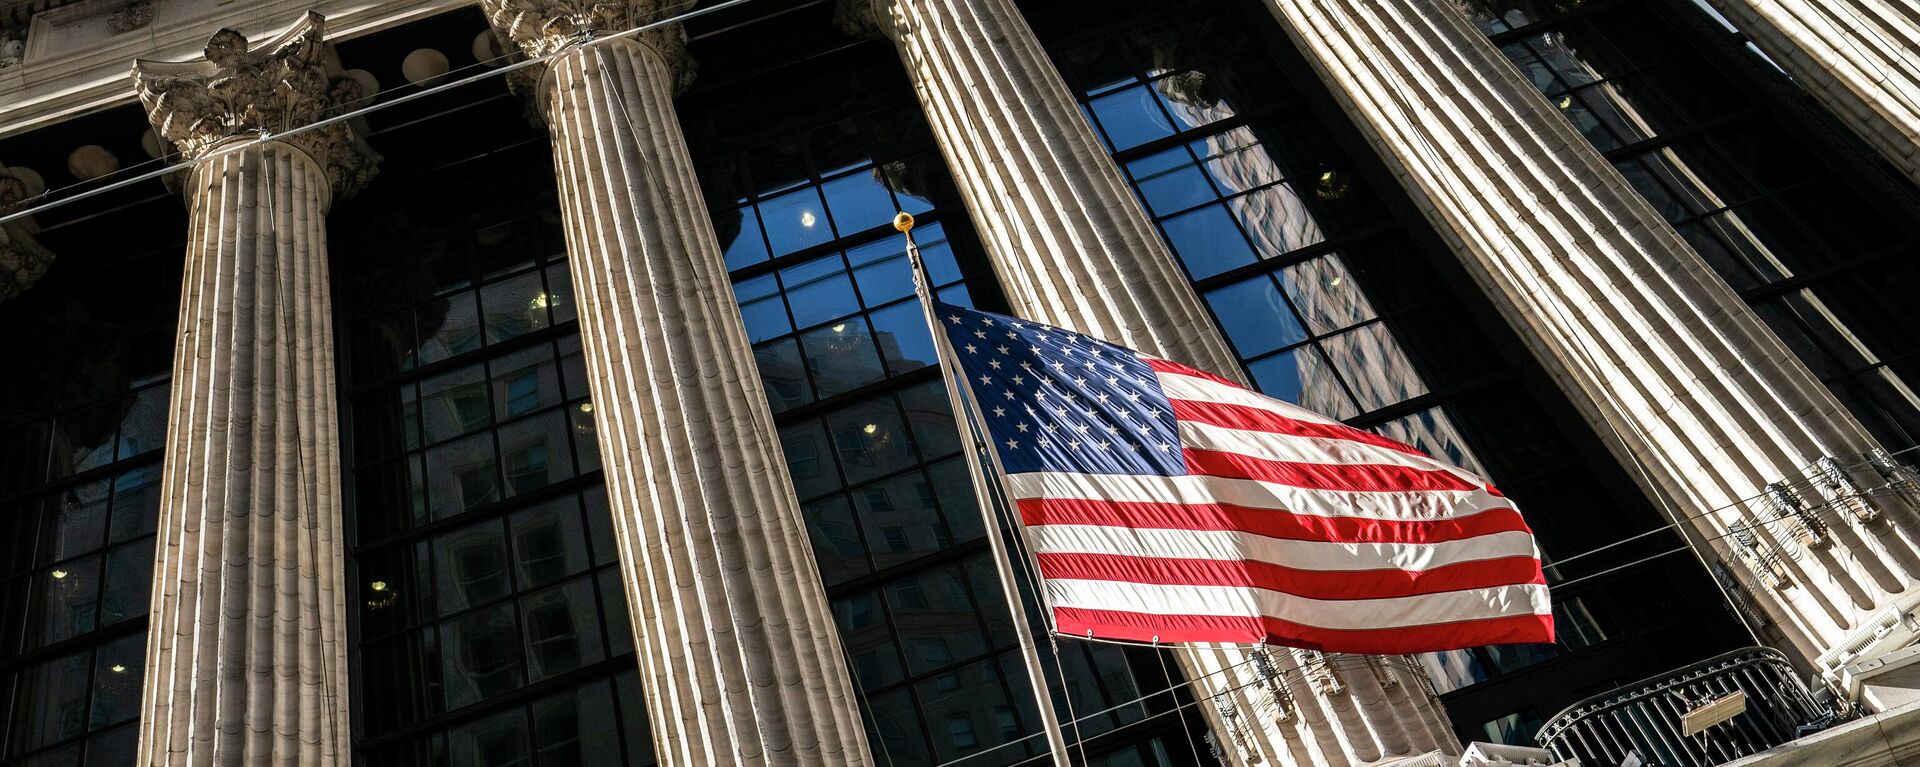 A U.S. flag waves outside the New York Stock Exchange, Monday, Jan. 24, 2022, in New York. Stocks are drifting between small gains and losses in the early going on Wall Street Tuesday, May 3, 2022 as investors await Wednesday's decision by the Federal Reserve on interest rates. The Fed is expected to raise its benchmark rate by twice the usual amount this week as it steps up its fight against inflation, which is at a four-decade high. - Sputnik International, 1920, 01.11.2023